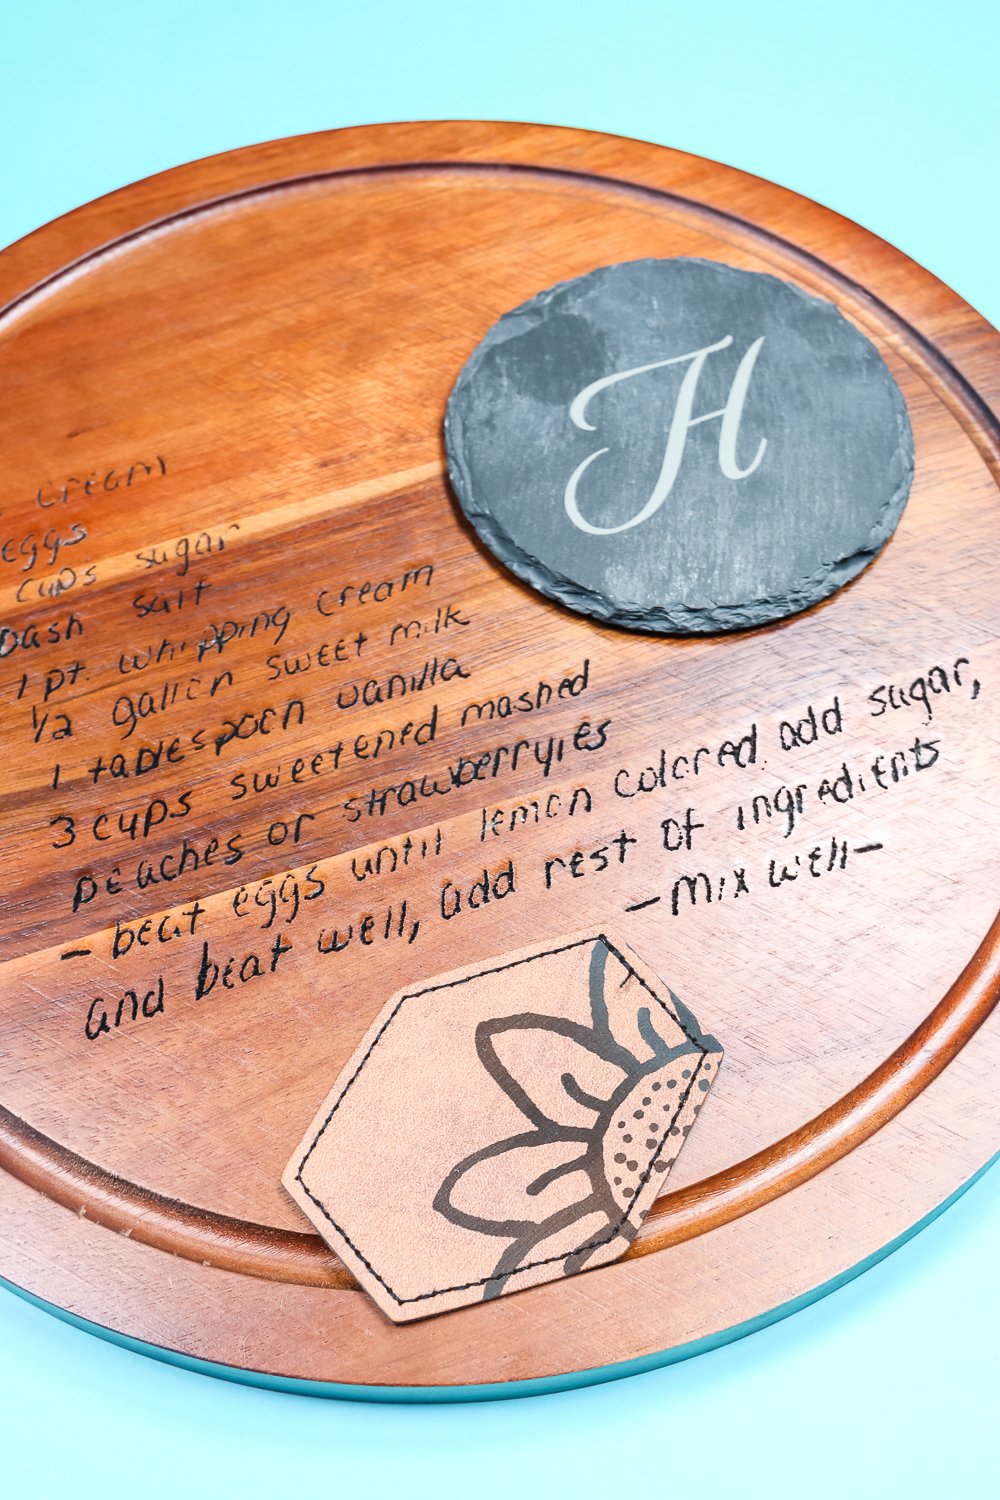 Engraving with Glowforge Aura finished projects.